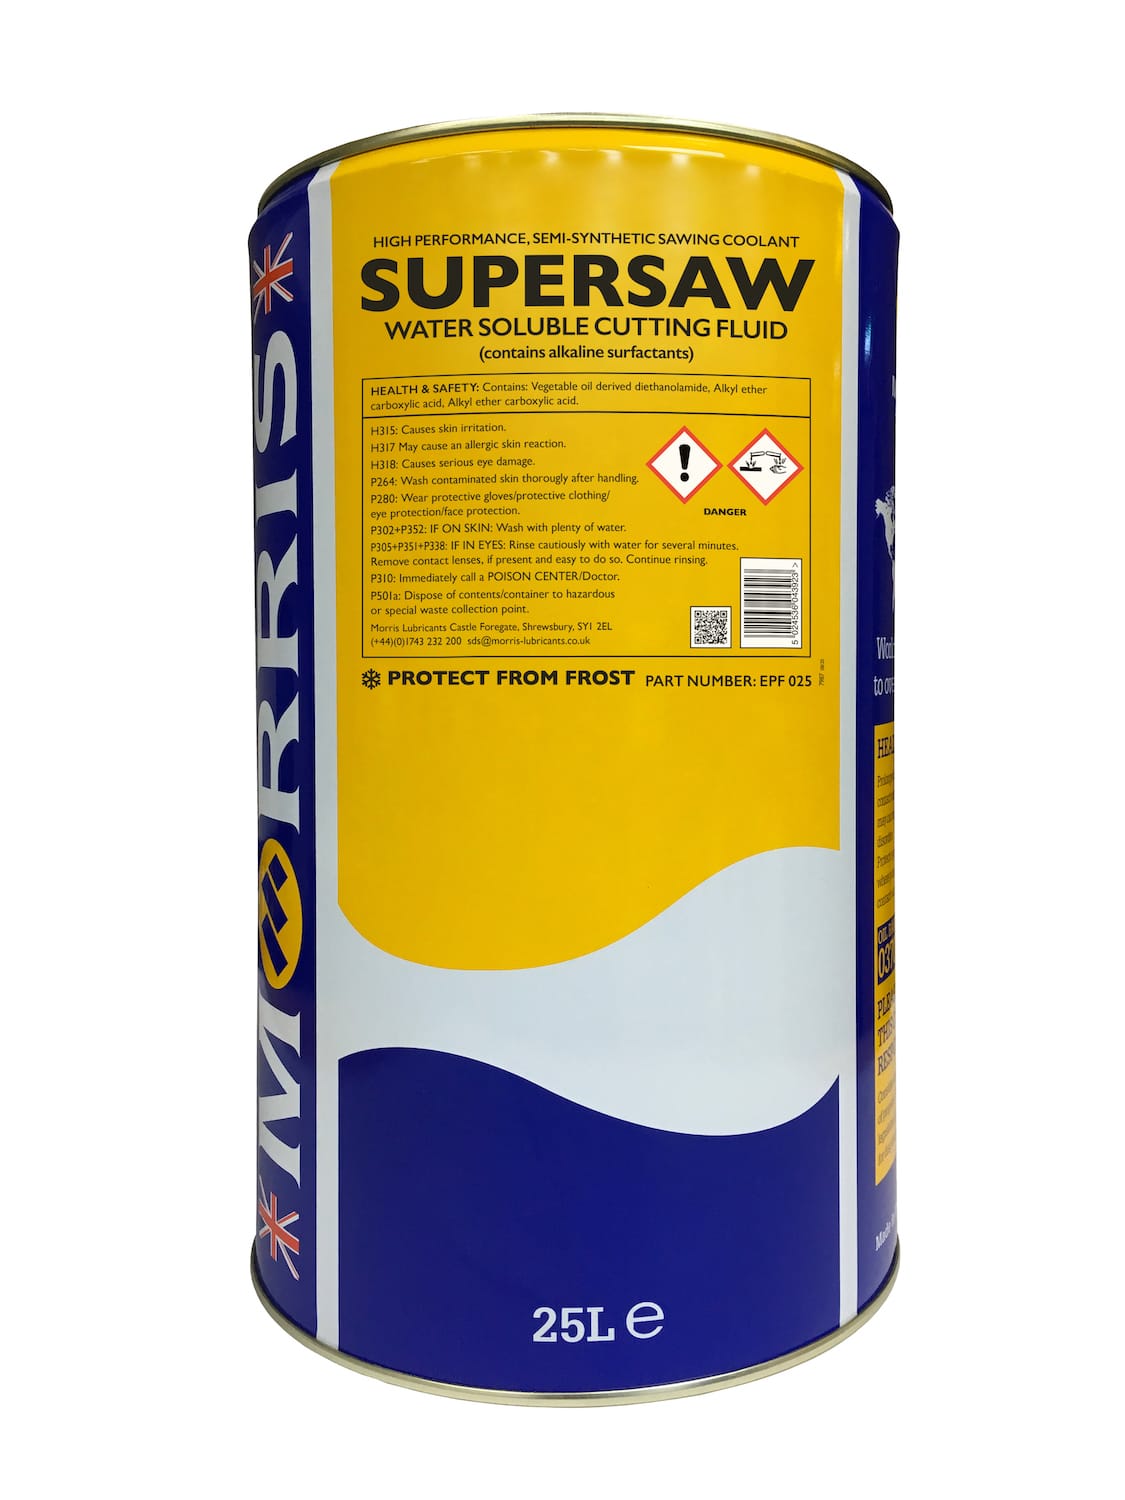 Supersaw